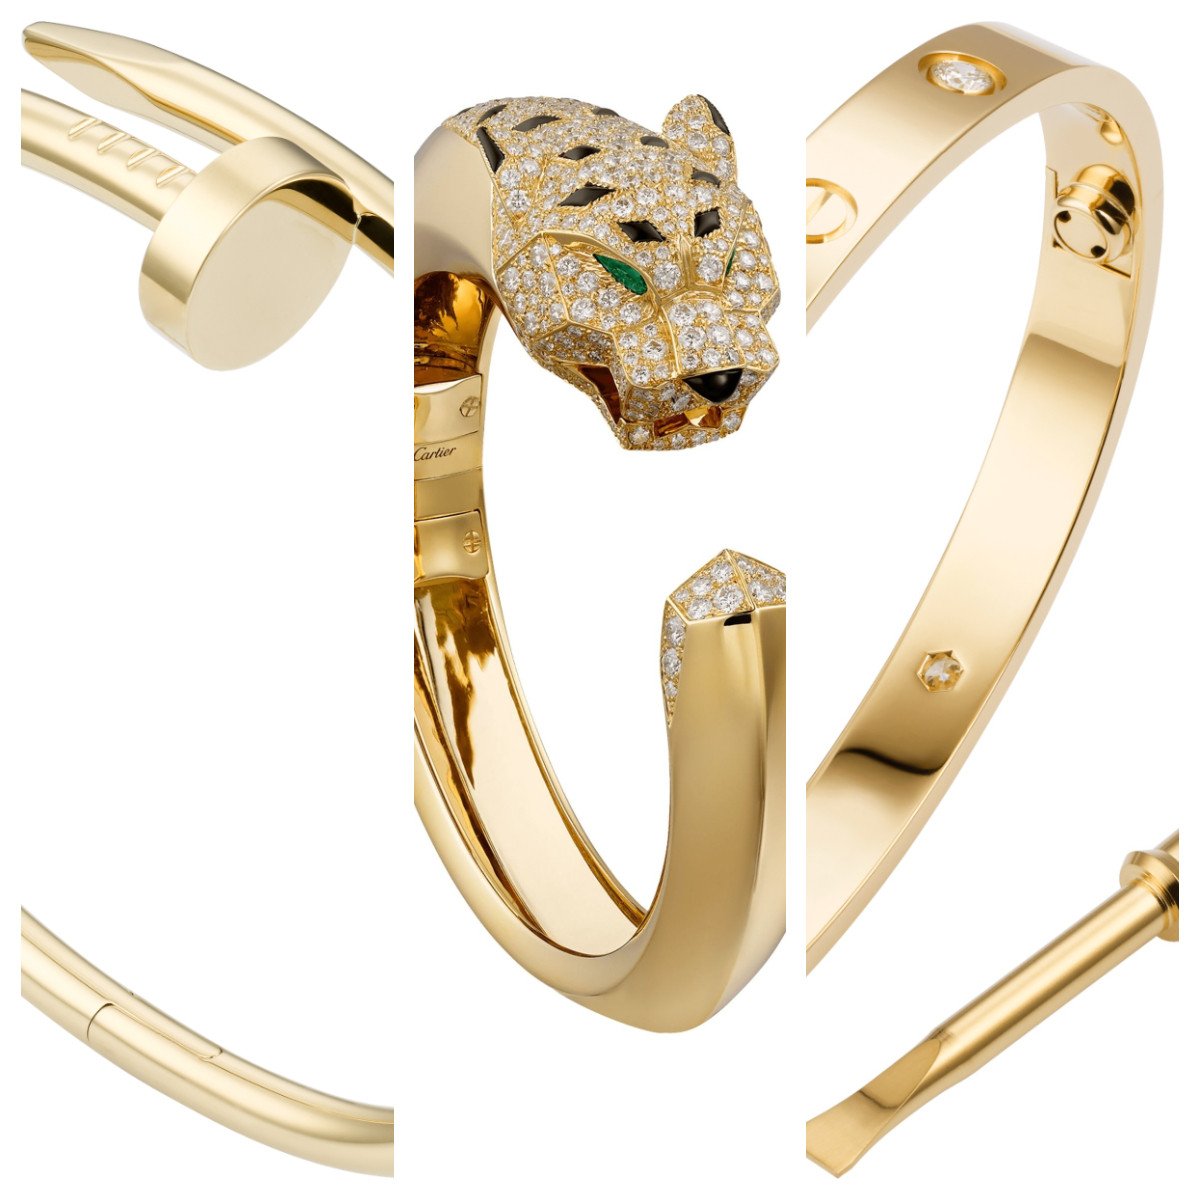 Cartier’s Panthère, Love and Juste un Clou have been brand signatures for decades and jewellery using these motifs remain popular today. Photo: Handout